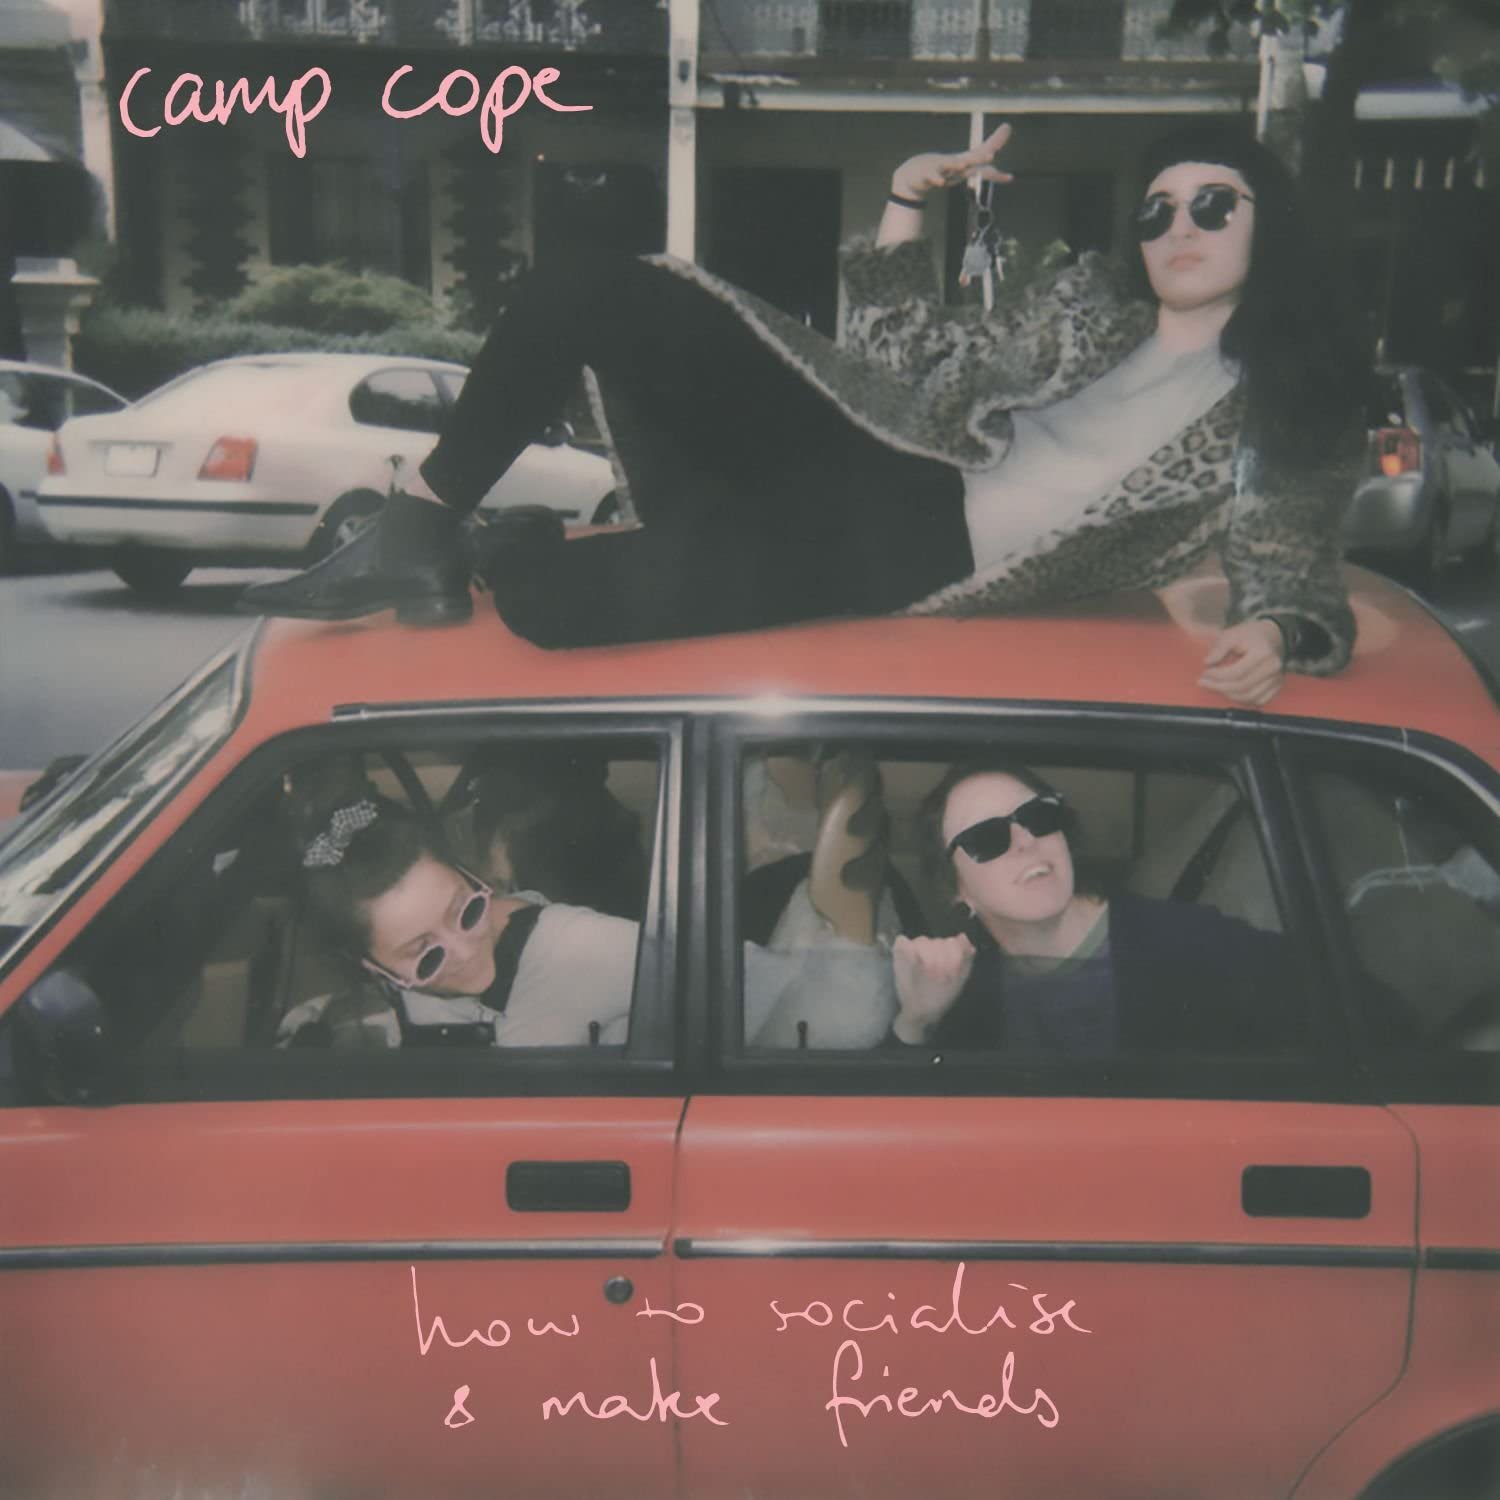 Image of How to Socialise & Make Friends / Camp Cope